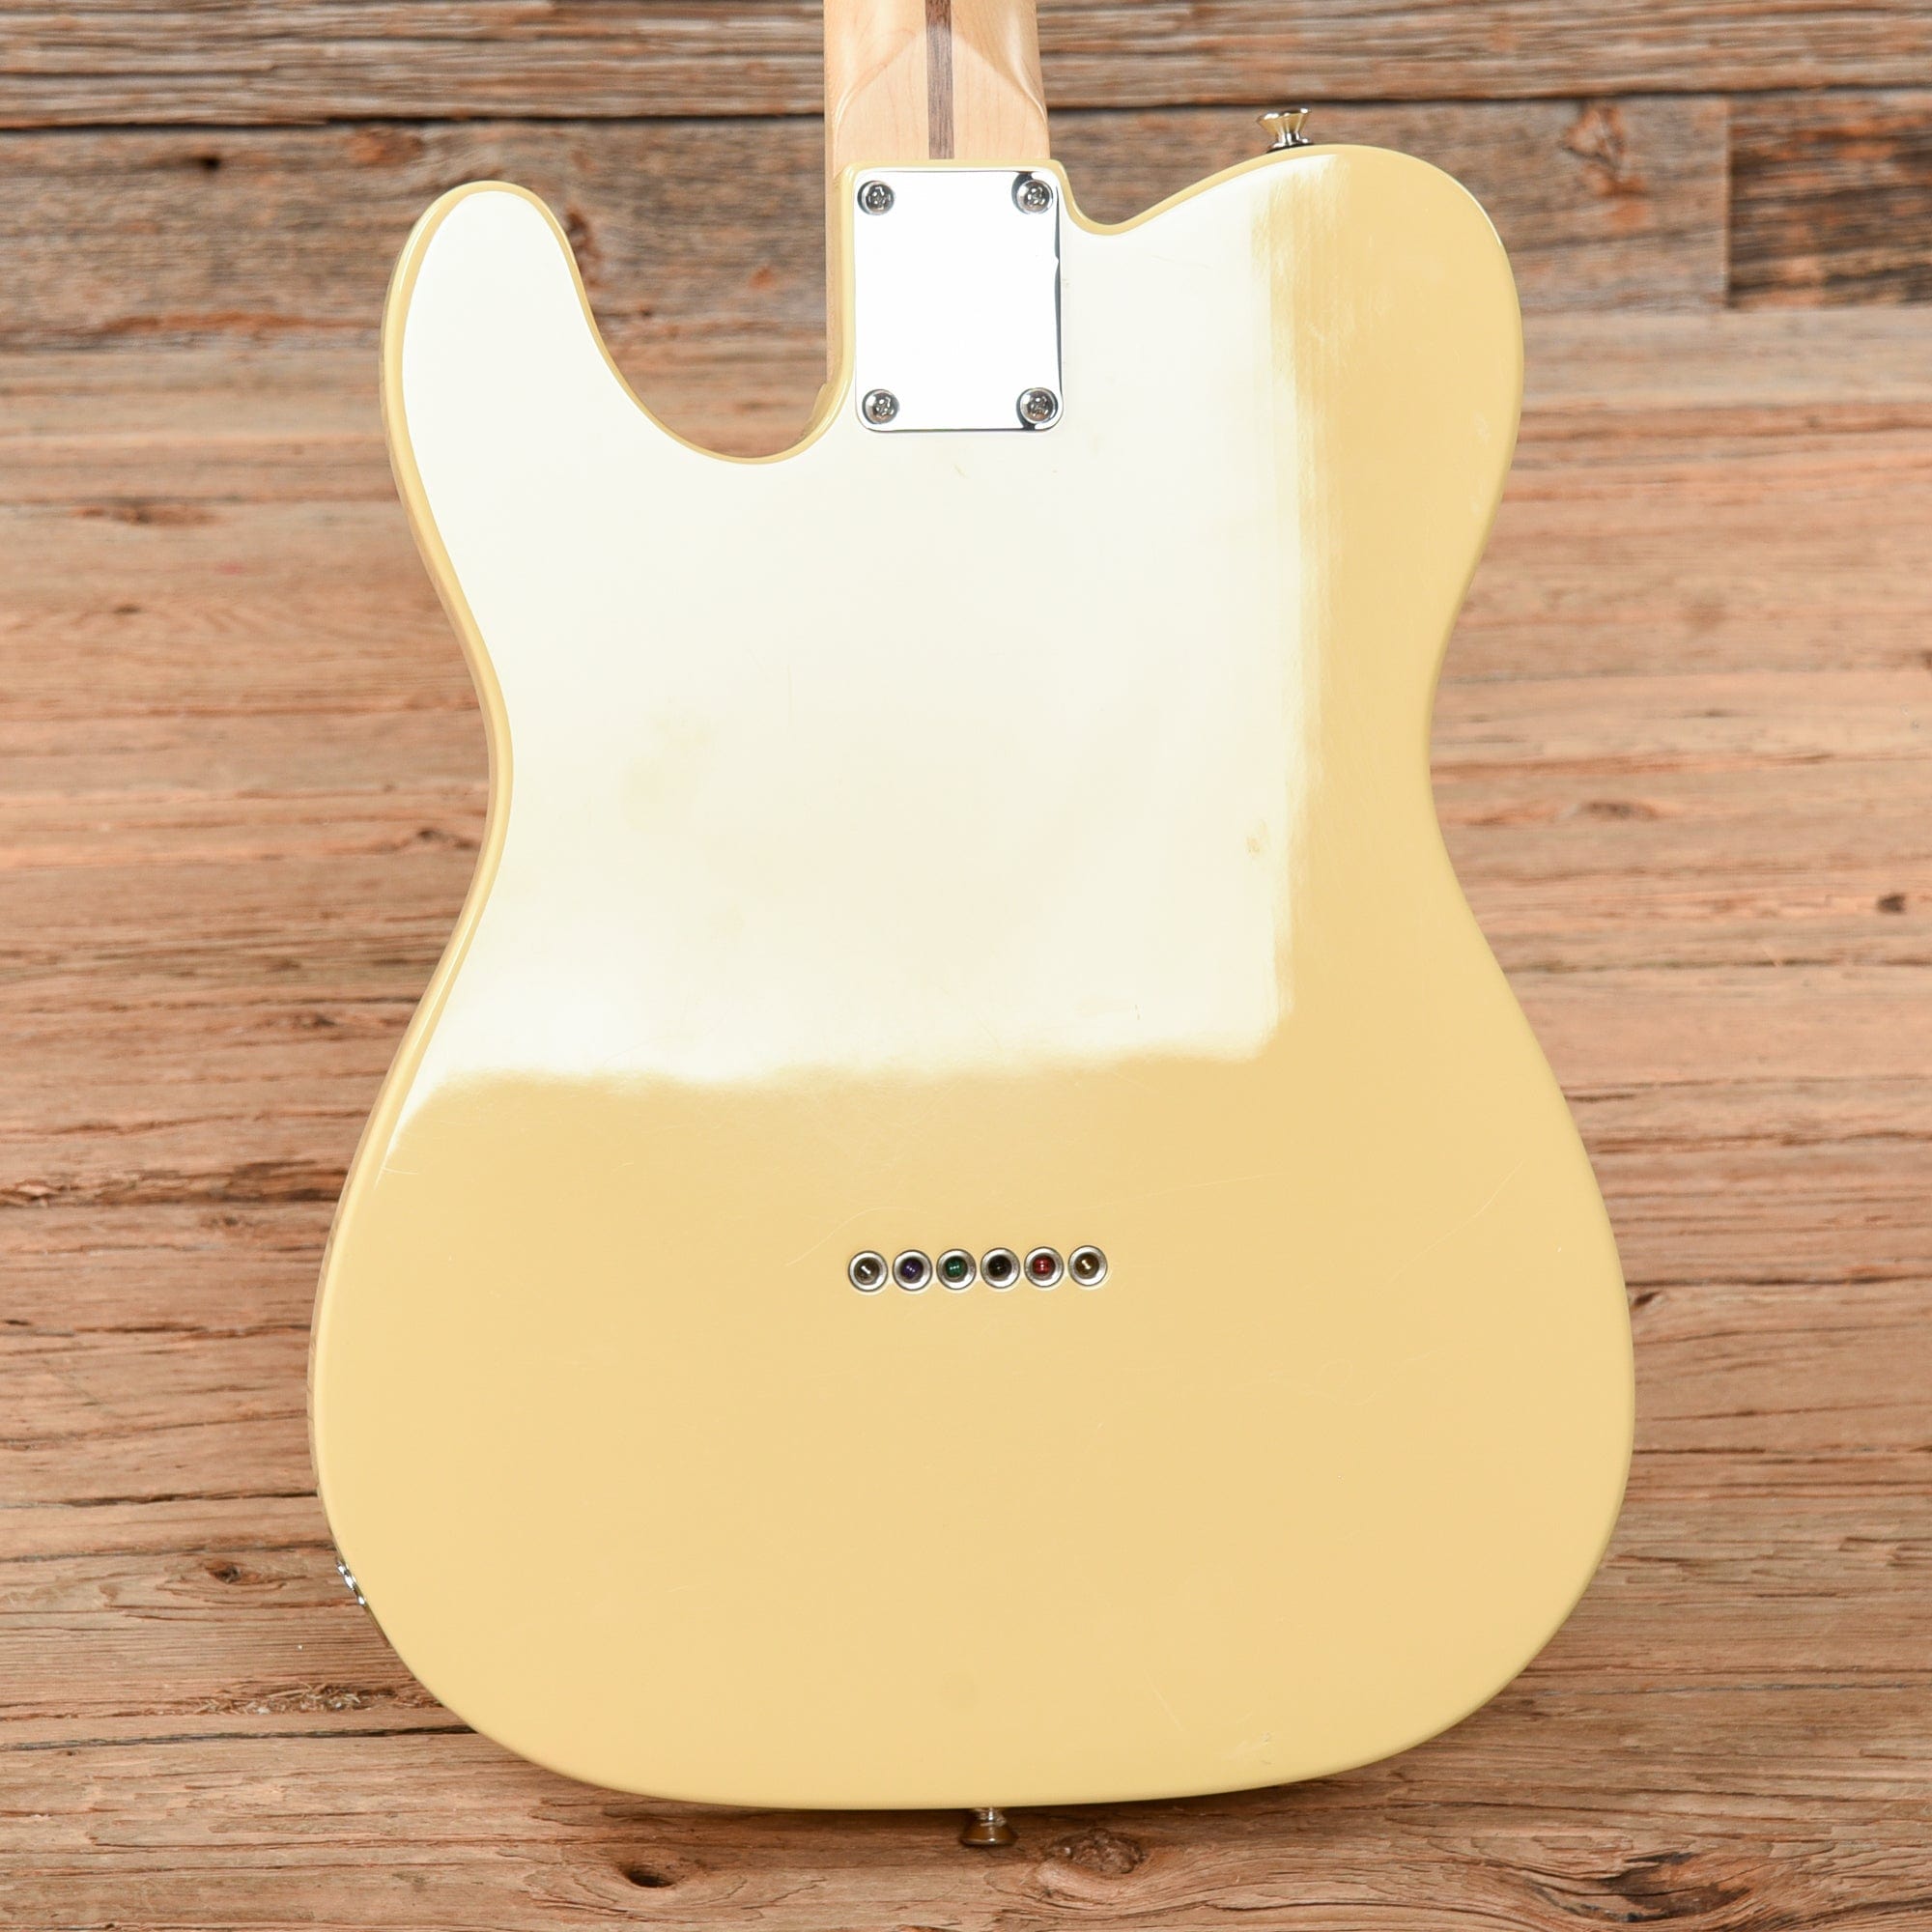 Fender American Performer Telecaster Vintage White 2019 Electric Guitars / Solid Body